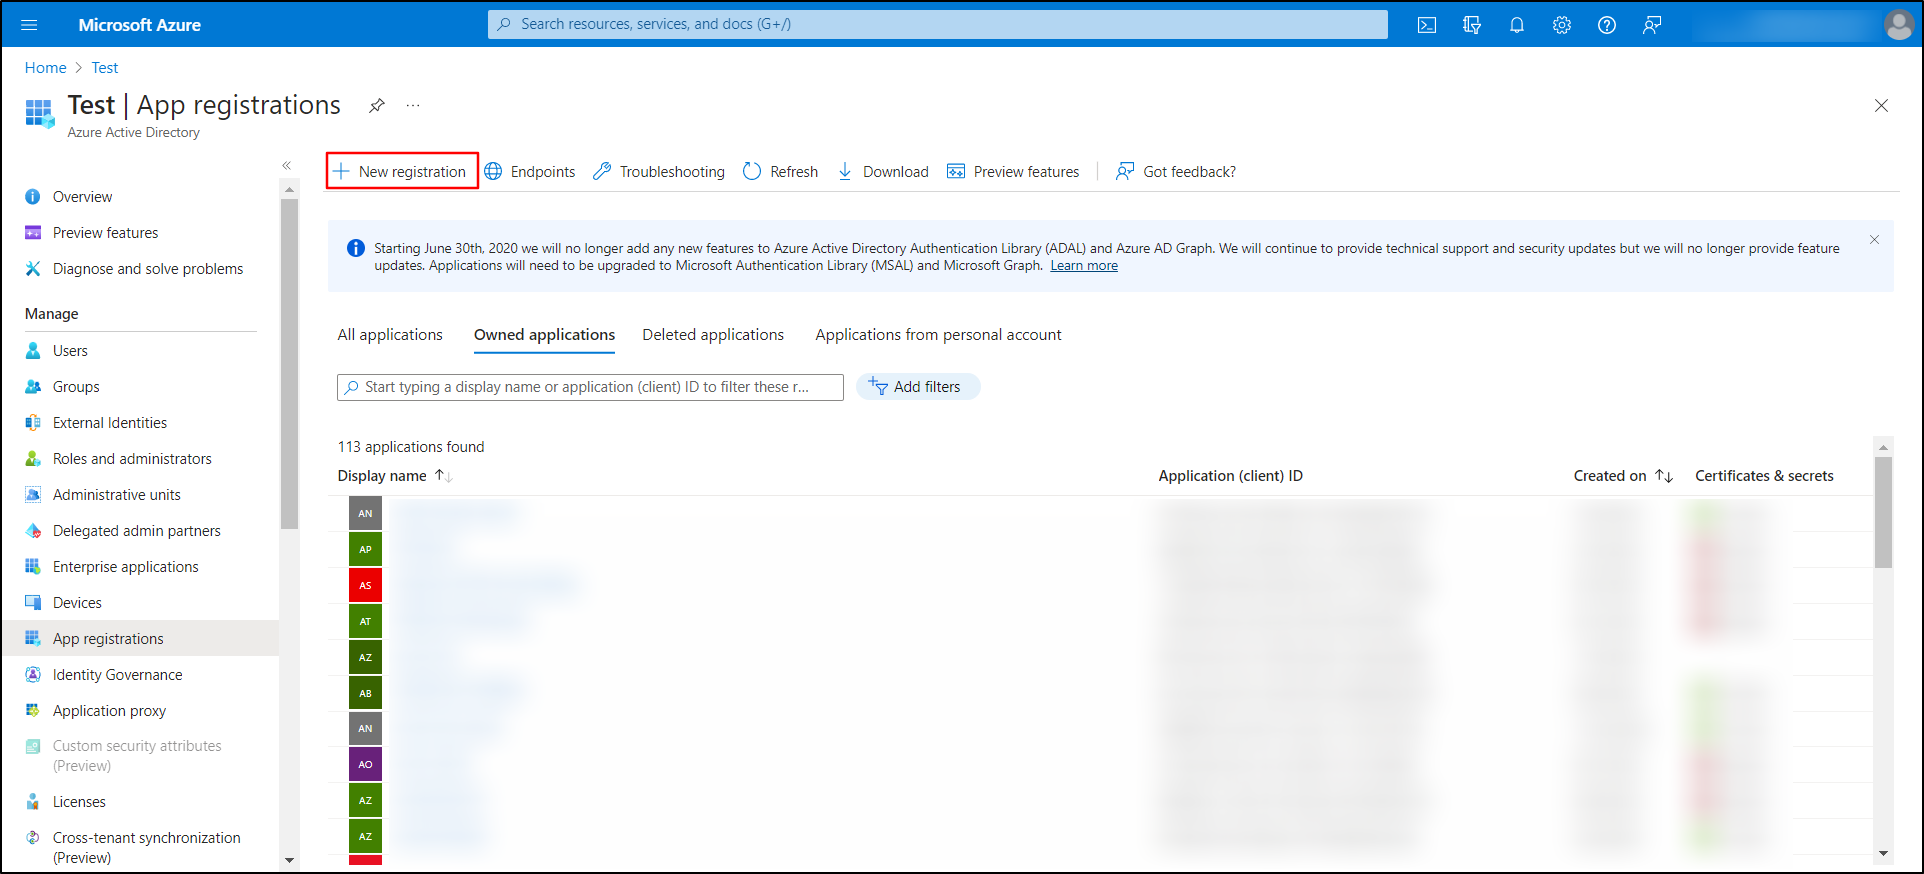 Microsoft Azure as OAuth/OpenID Provider - Click on New registration button